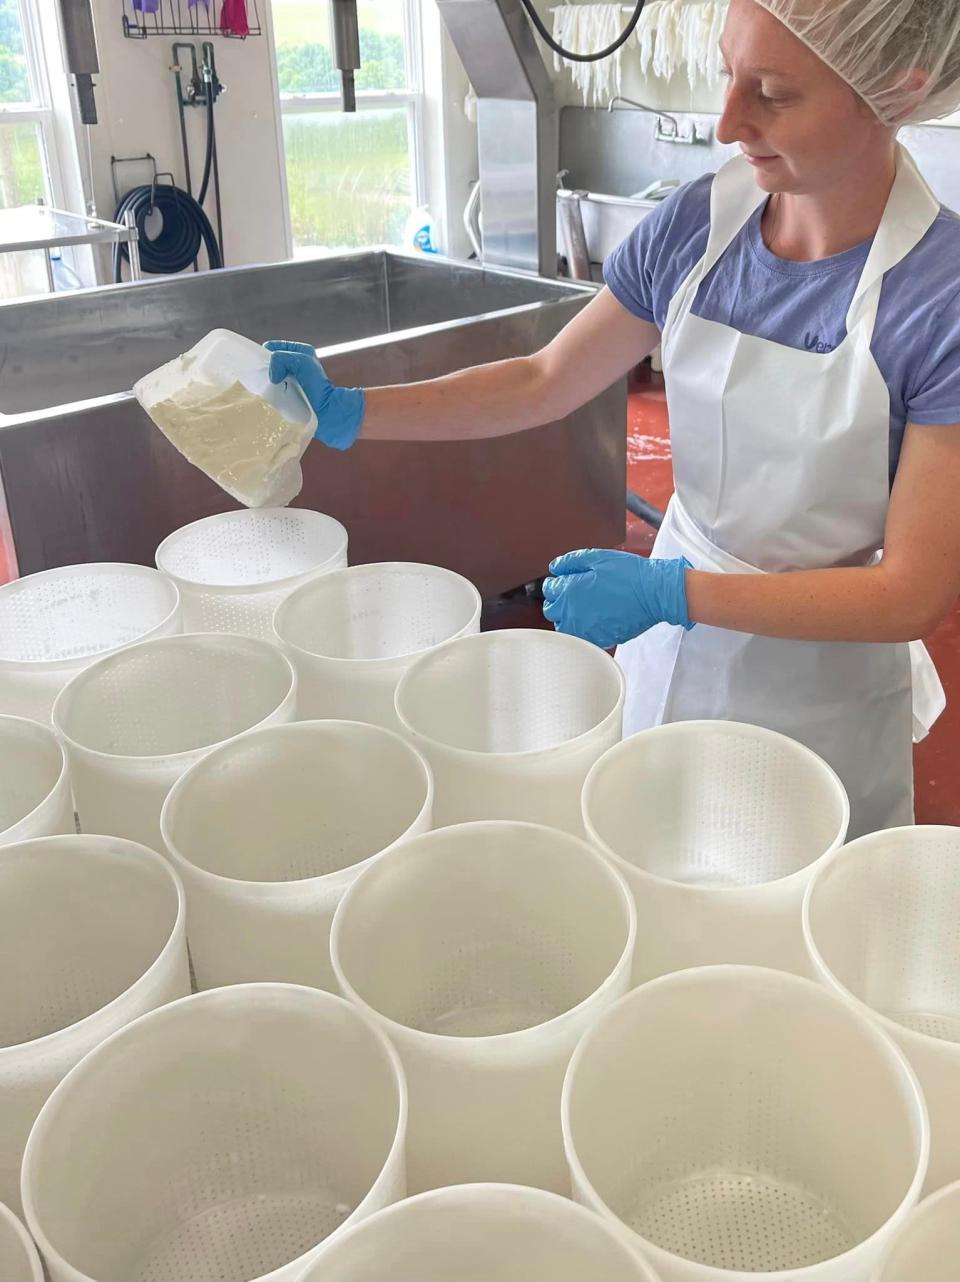 In this picture taken in July 2022 at Calkins Creamery, Maggie is filling molds with their Georgic cheese.